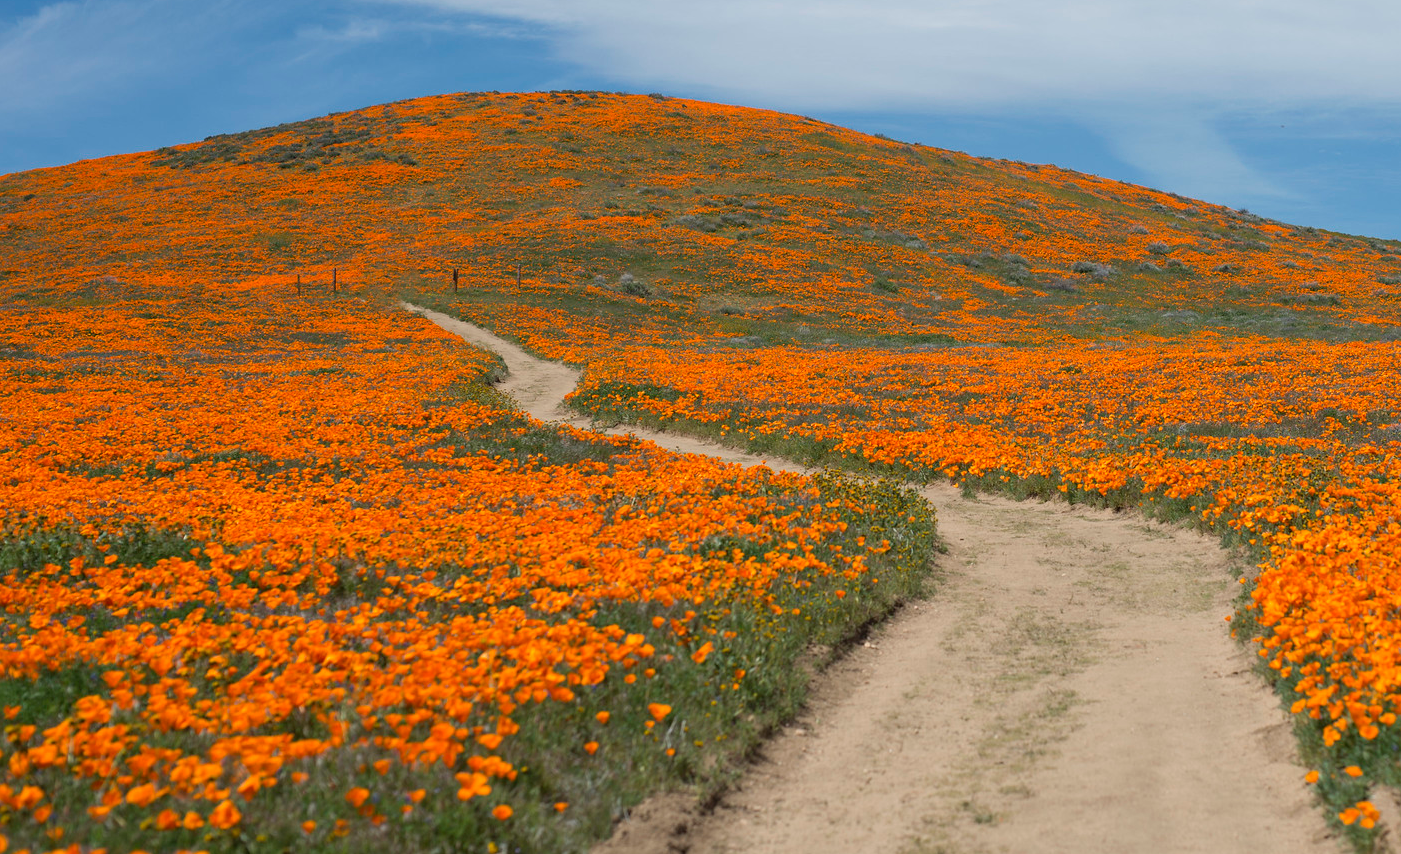 A dirt path is carved through a field of Poppies in the Antelope Valley.